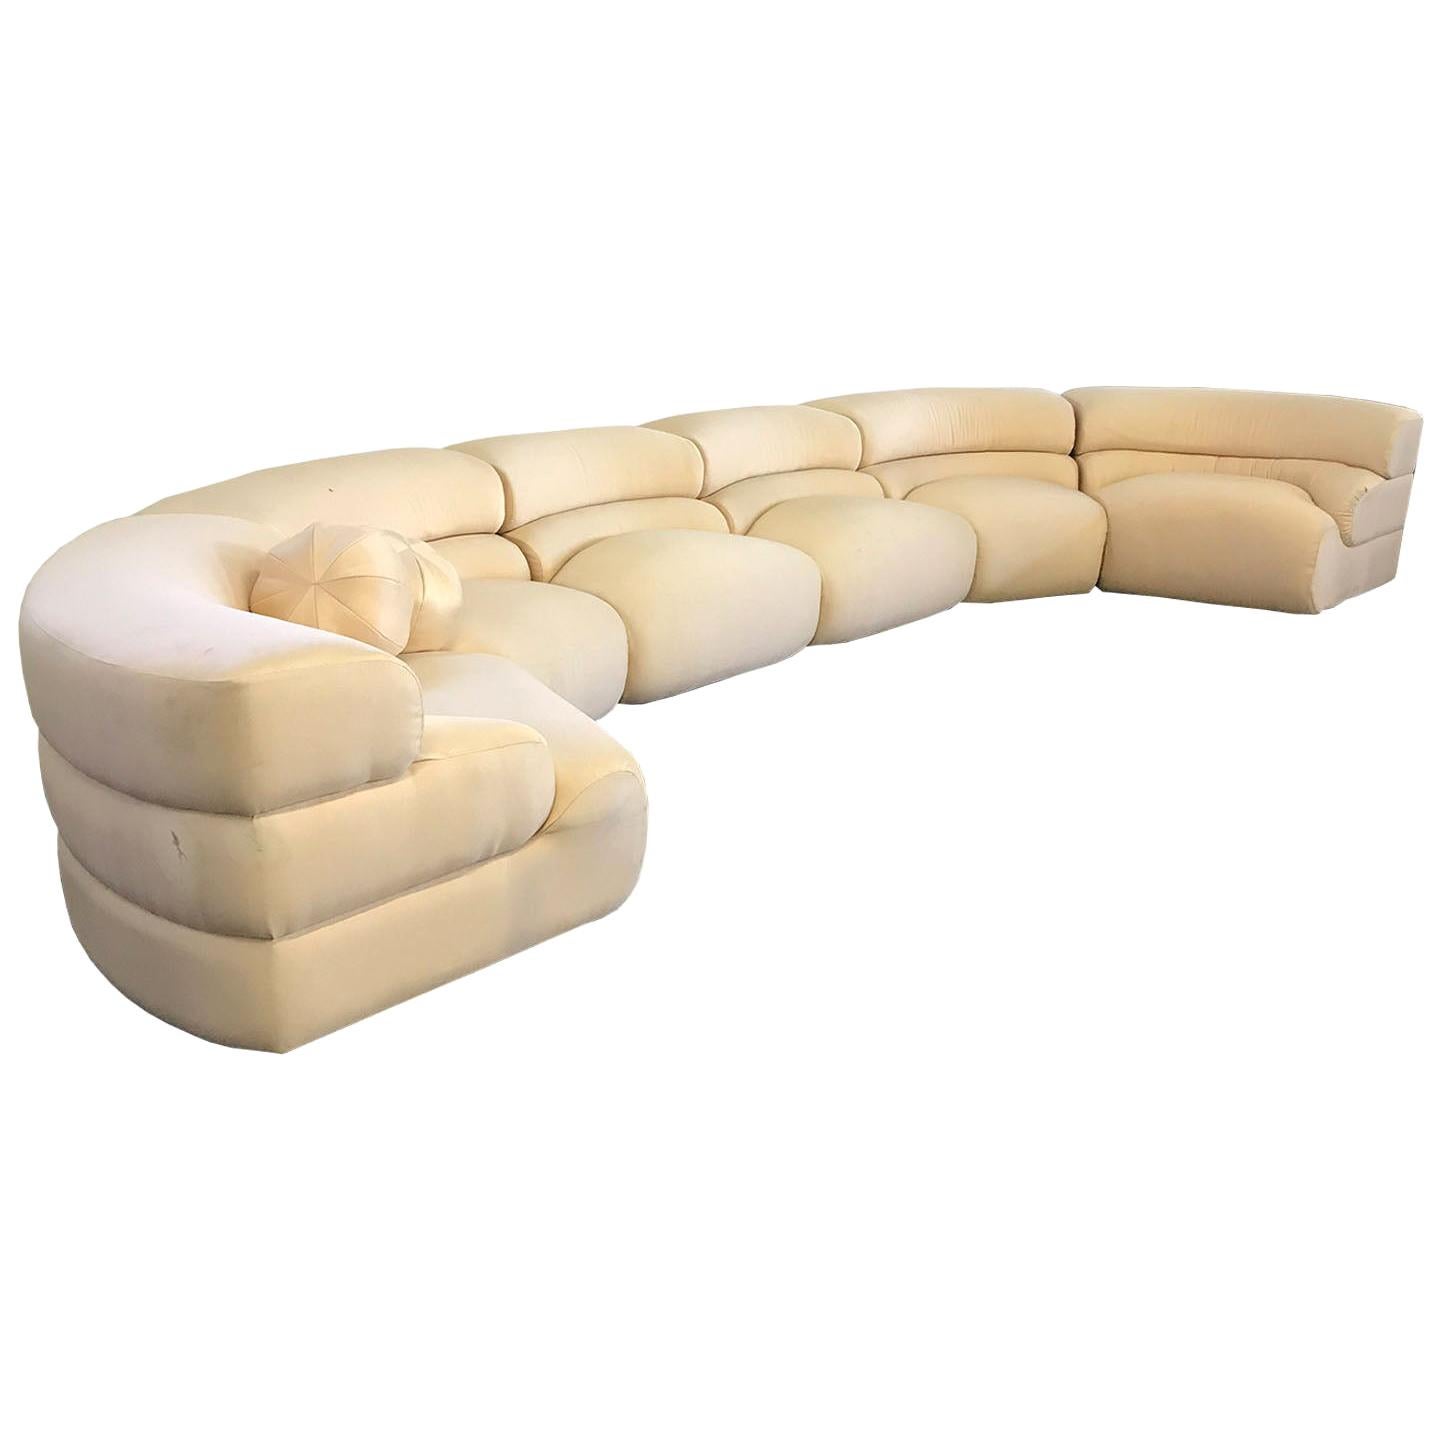 Kagan for Preview 6 Piece Sectional